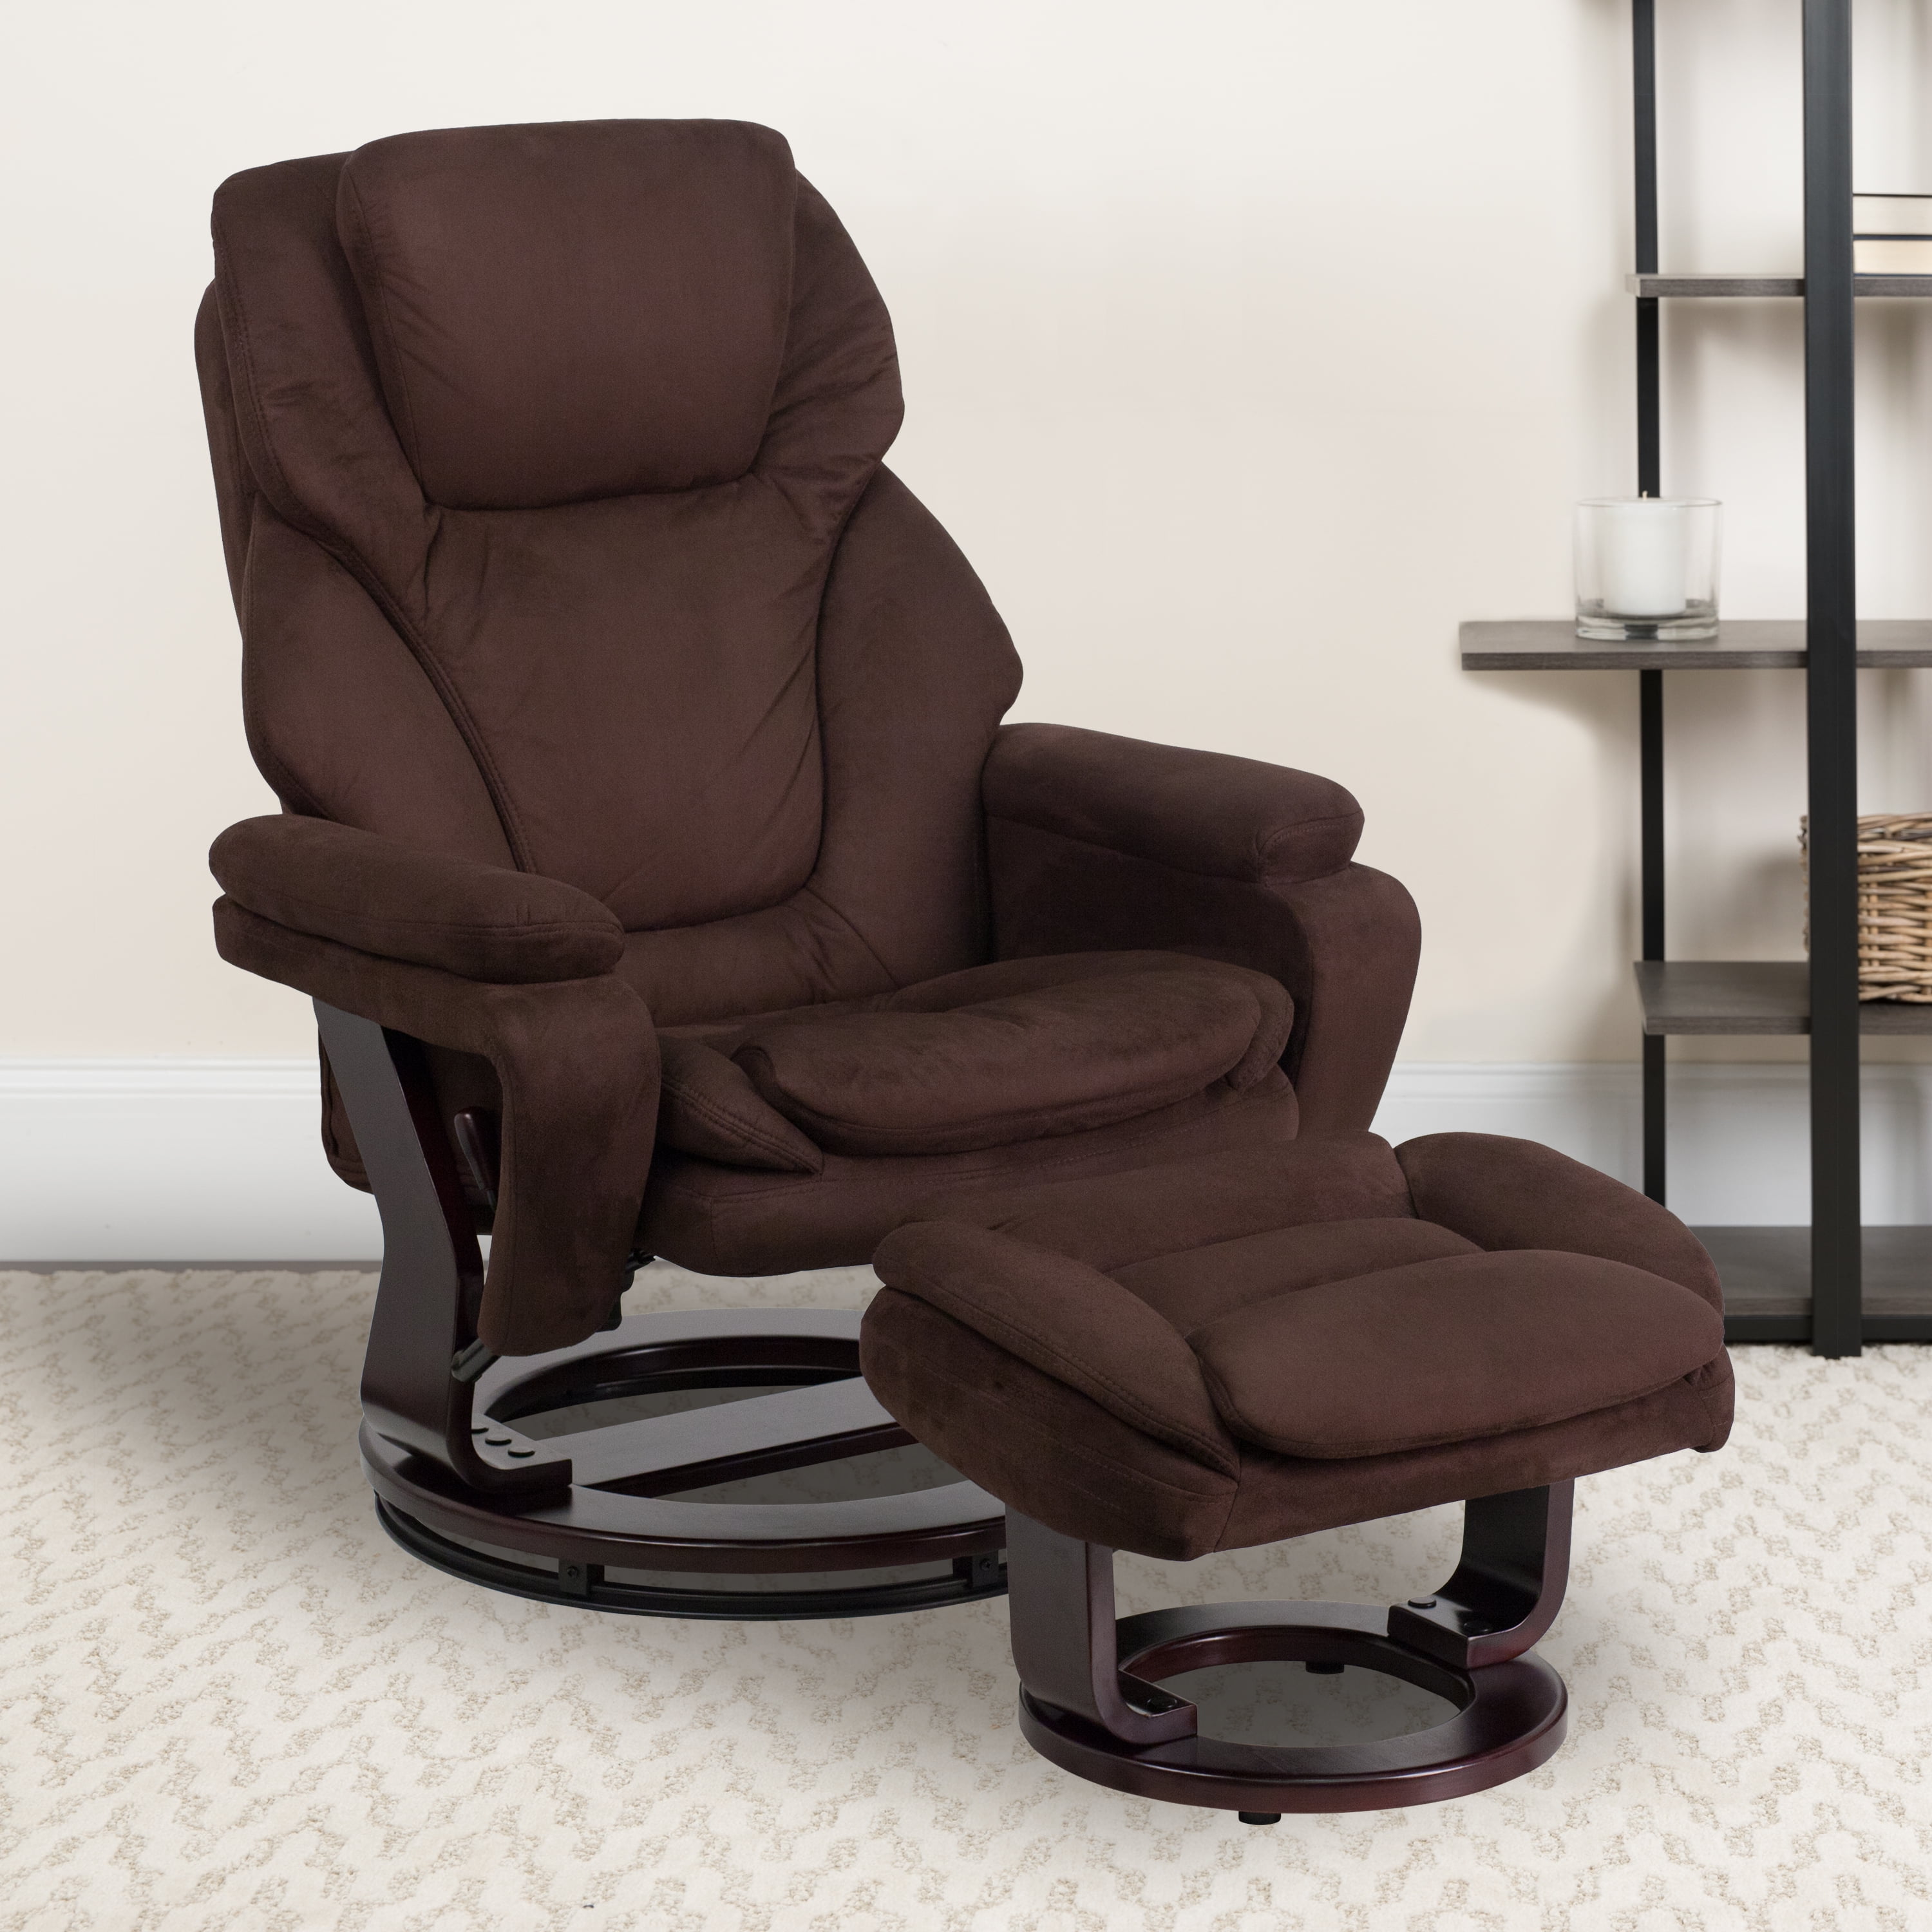 Flash Furniture Contemporary Multi, Modern Leather Recliner With Ottoman